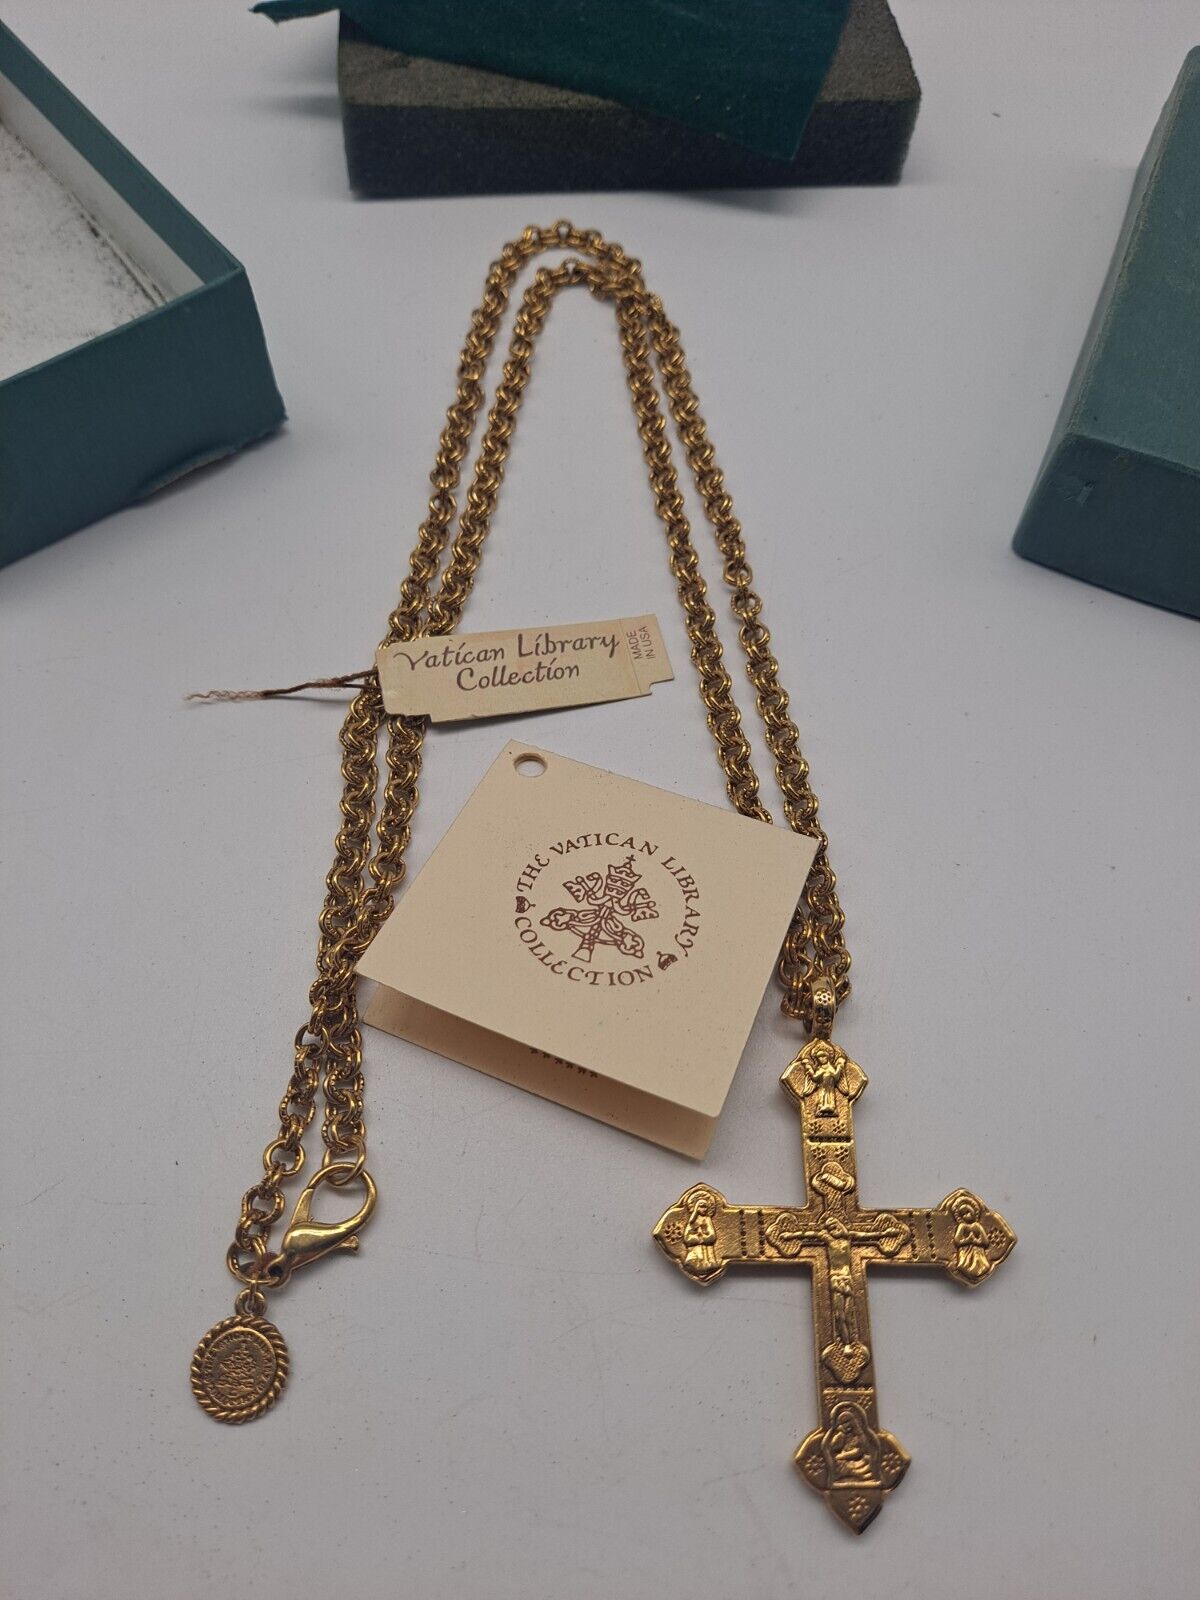 Vintage Vatican Library Collection Crucifix Necklace Original Box Gold Plated